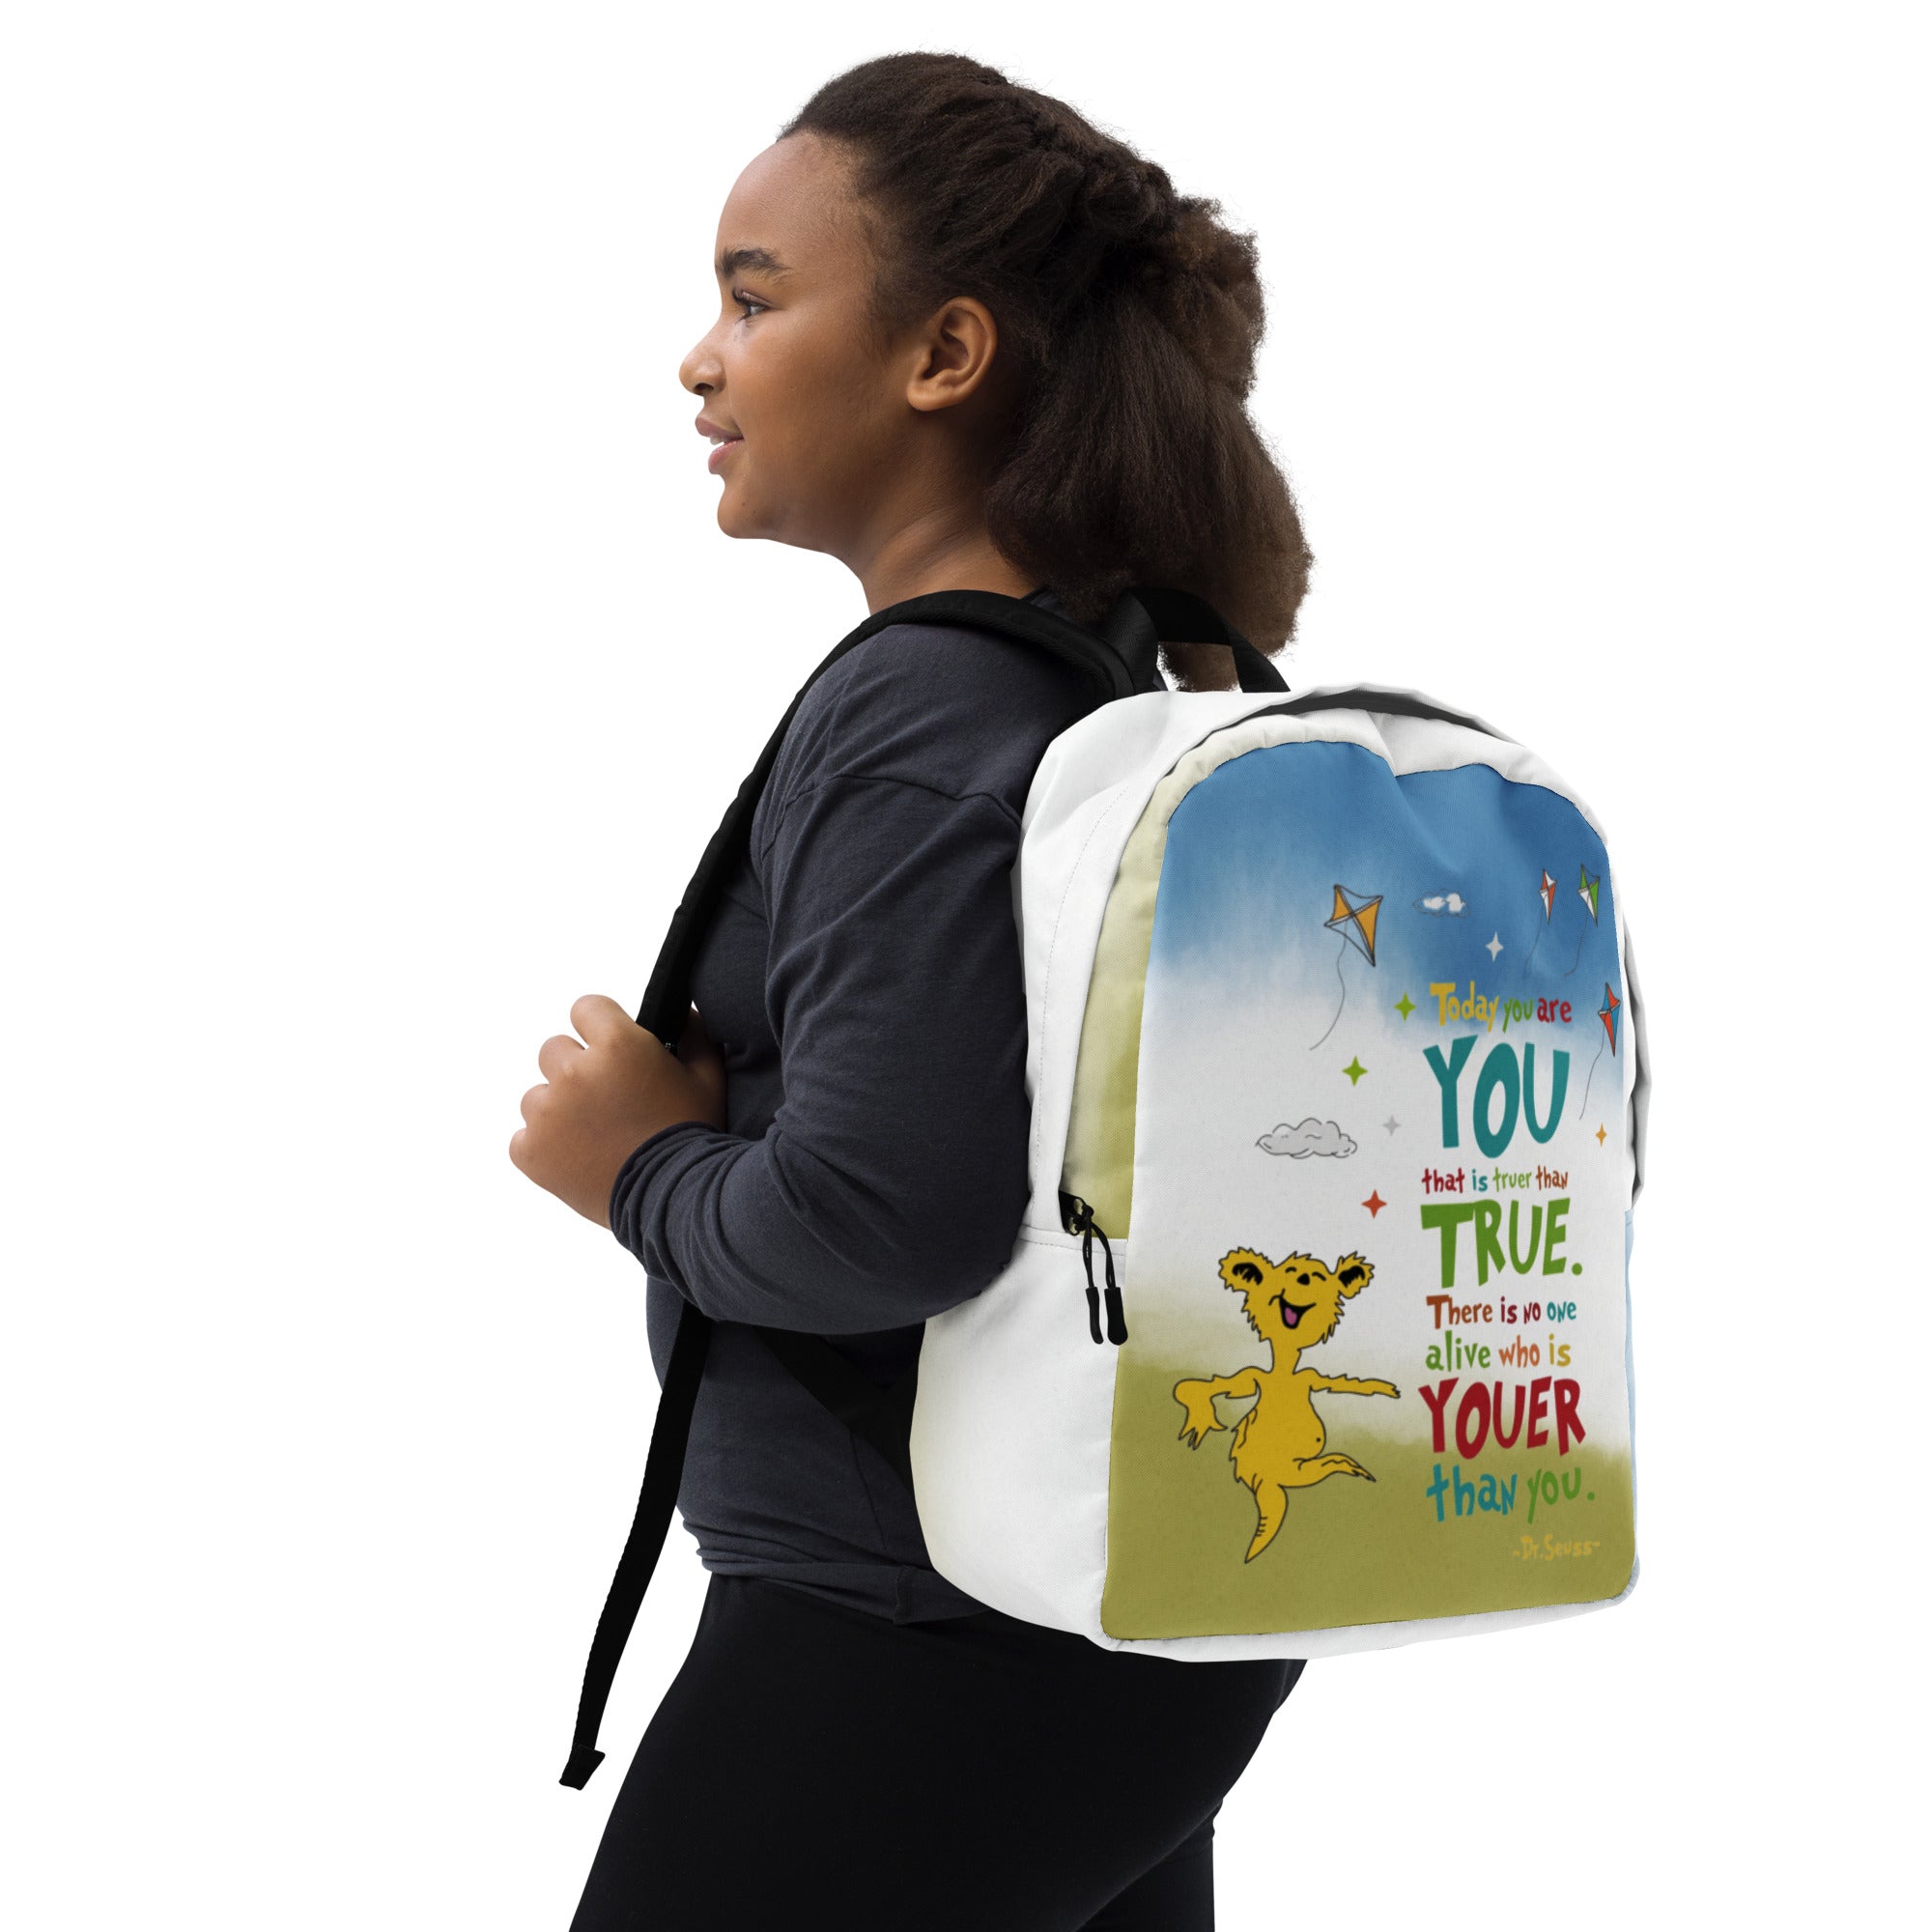 "No one can be youer than you" Minimalist Backpack